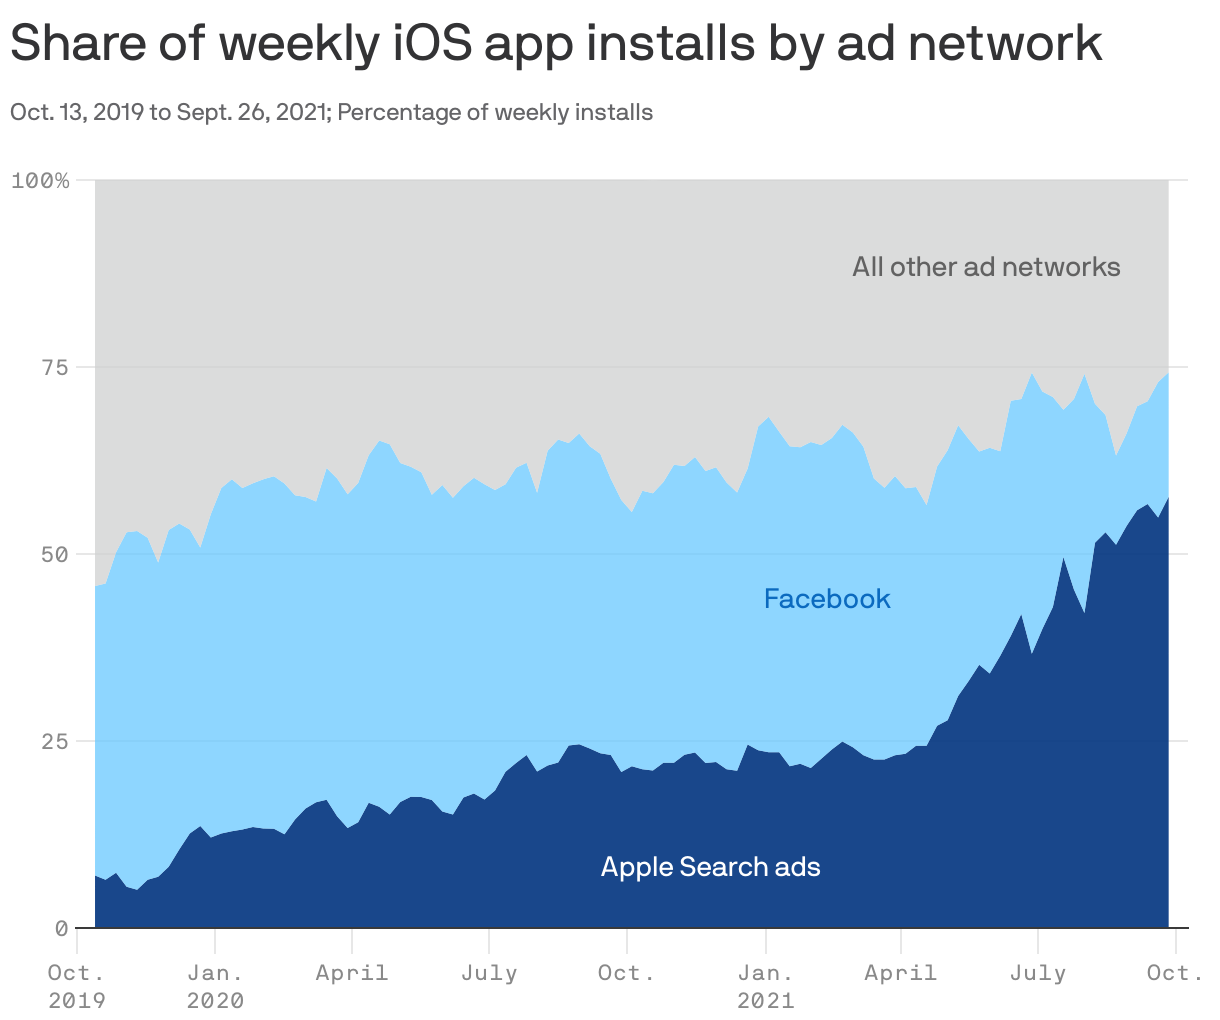 Share of weekly iOS app installs by ad network